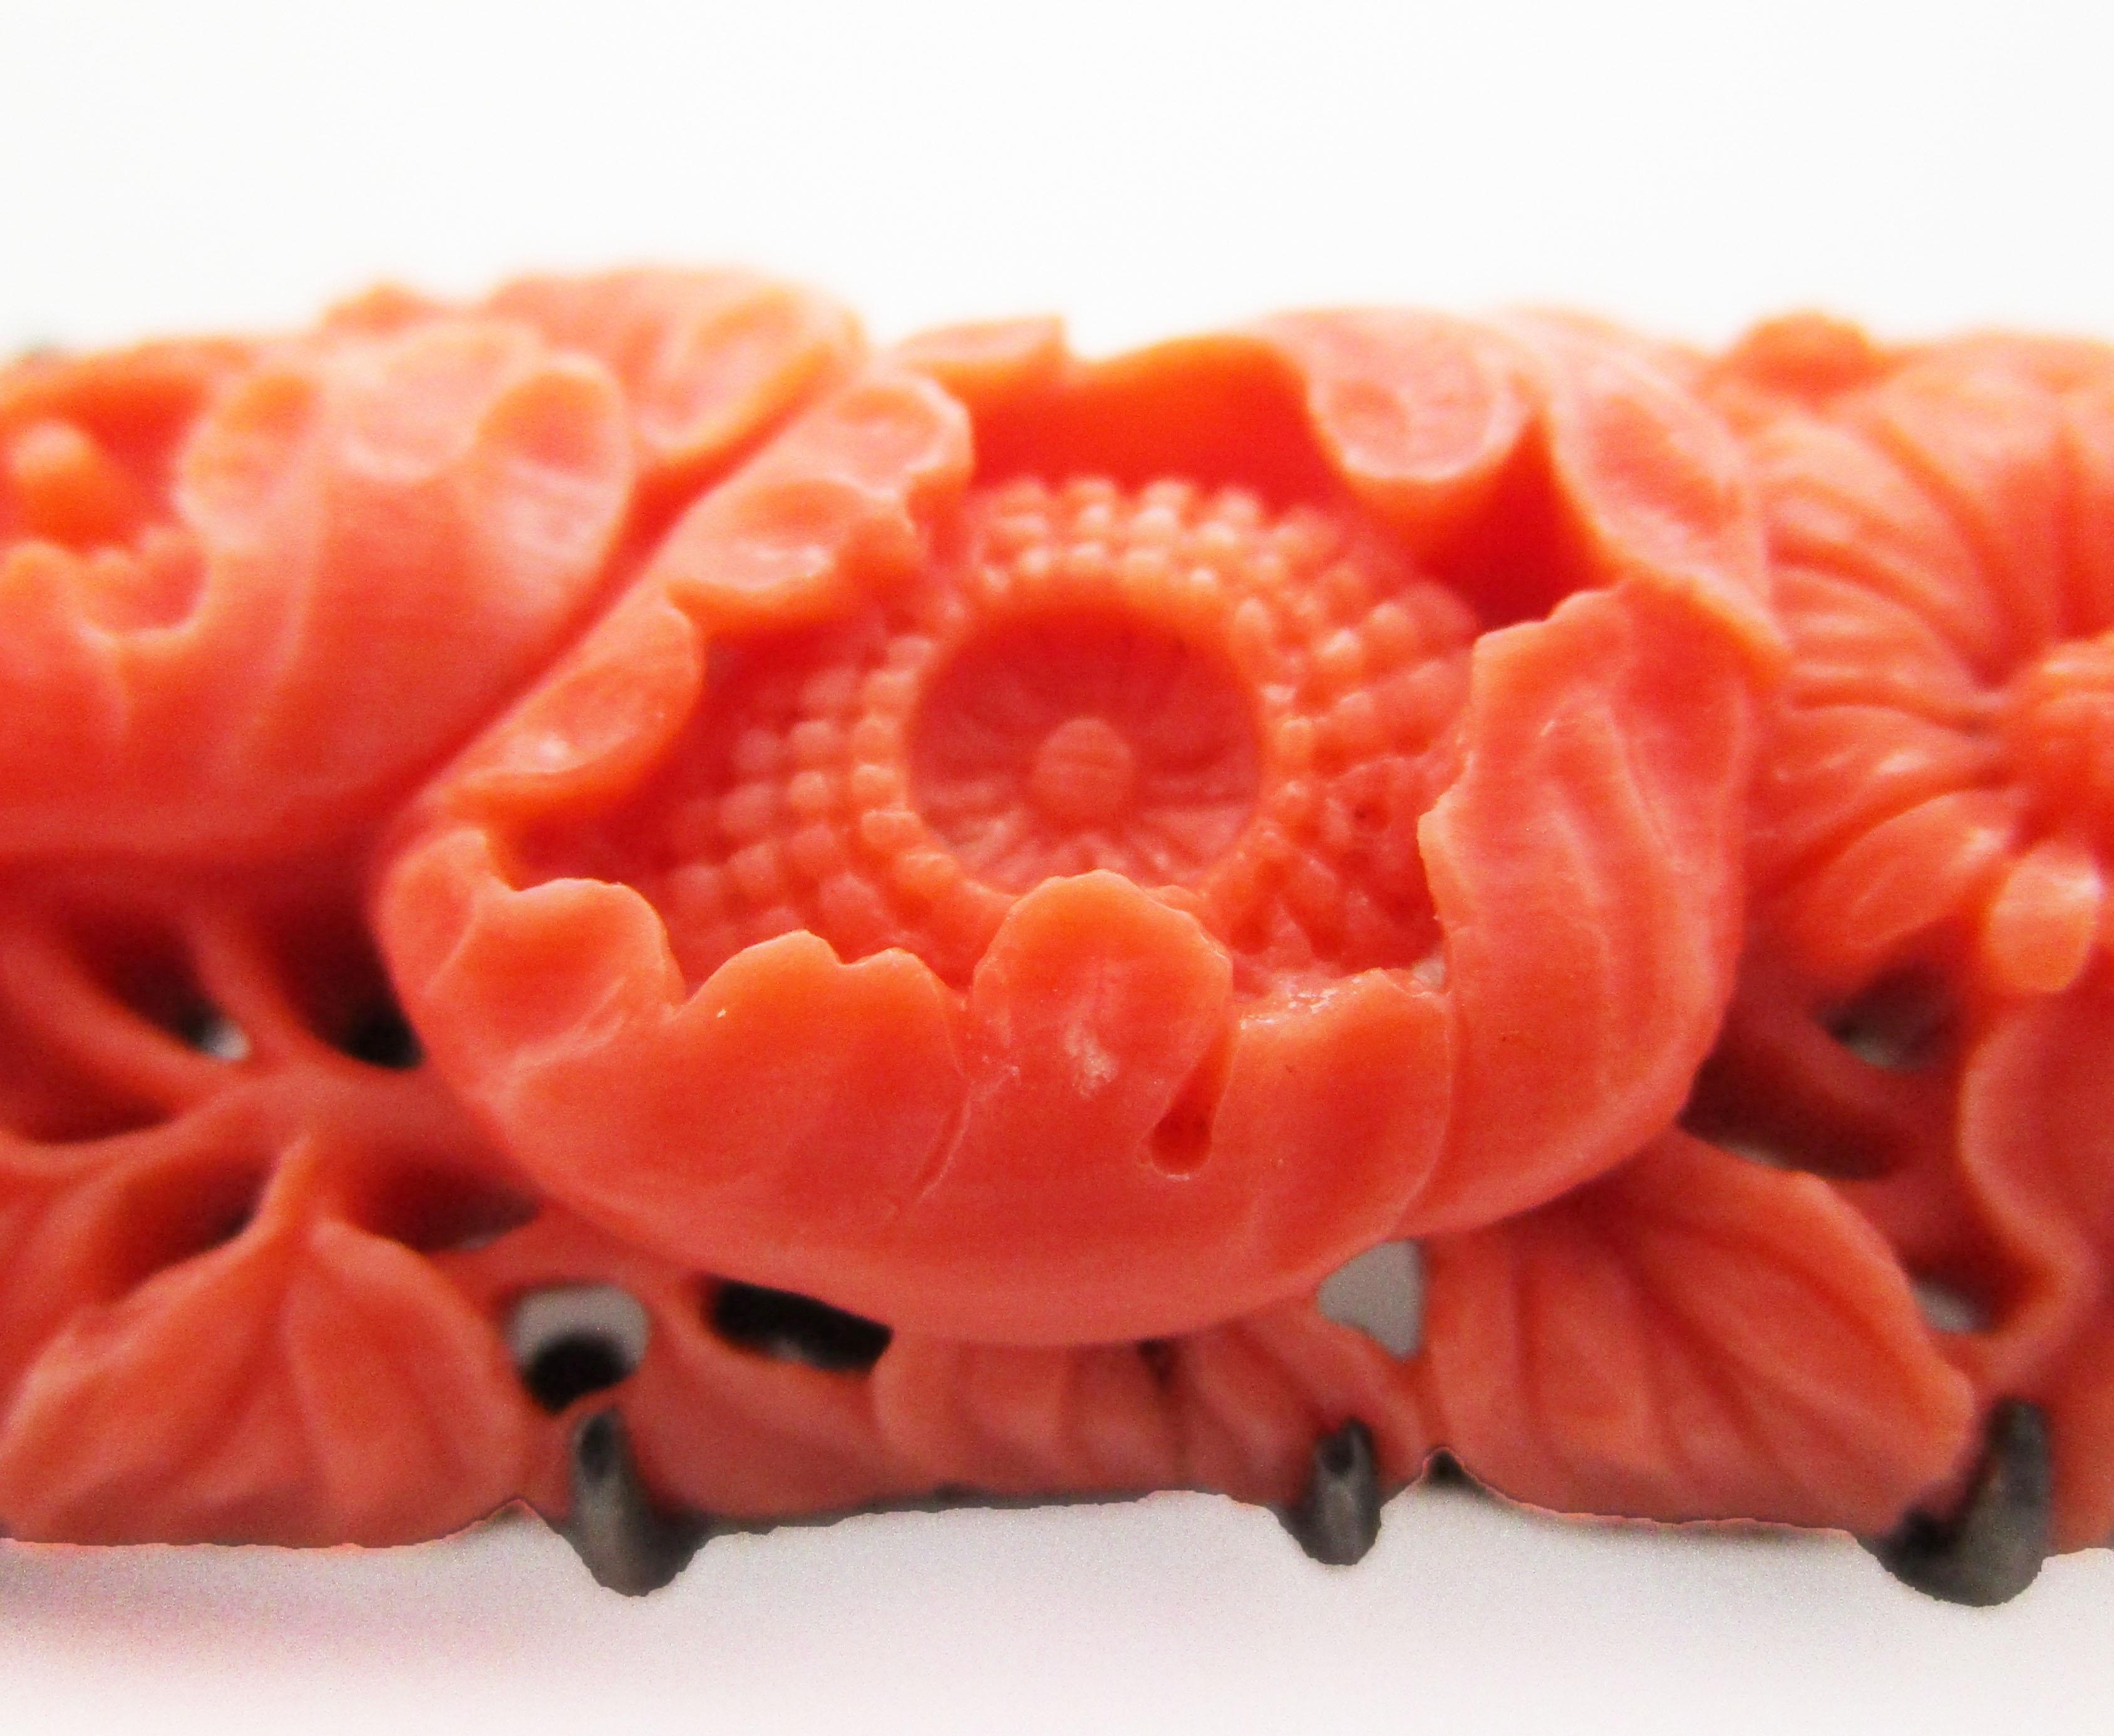 This gorgeous brooch is from the 1950s and has a stunning post World War II pedigree in hand-carved orangey-red natural undyed coral and sterling silver. The delicate hand carving features an incredible floral image of daisies overlaid by